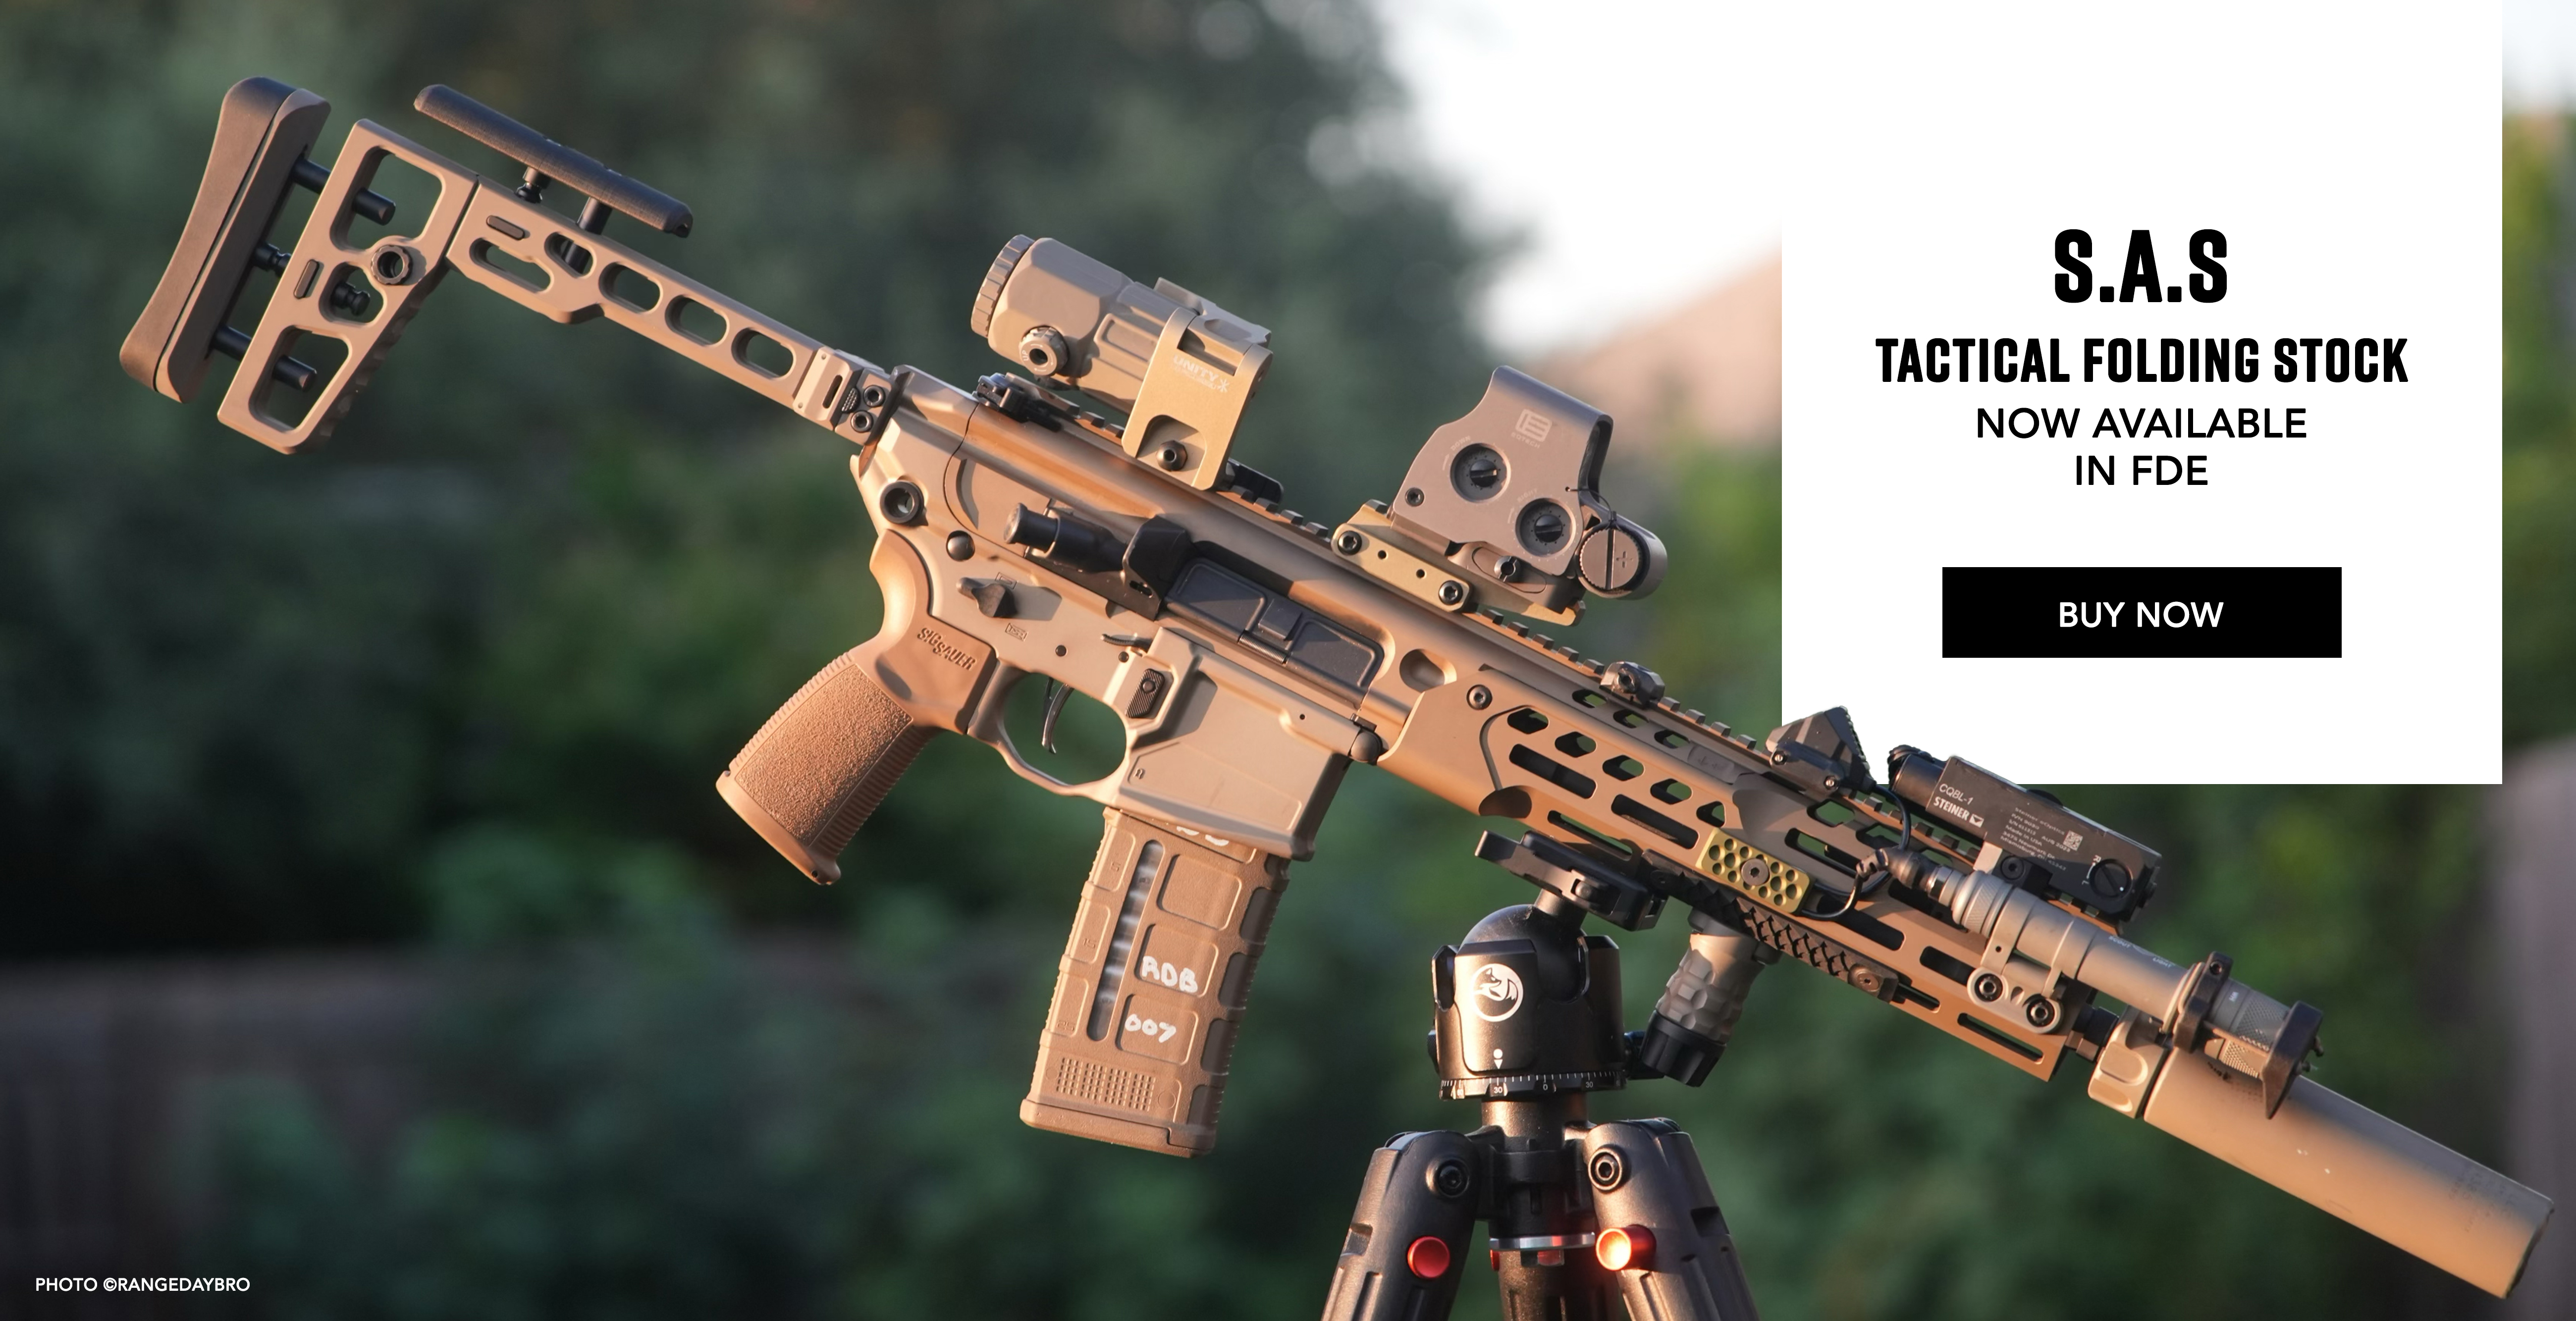 S.A.S Tactical Folding Stock now available in FDE